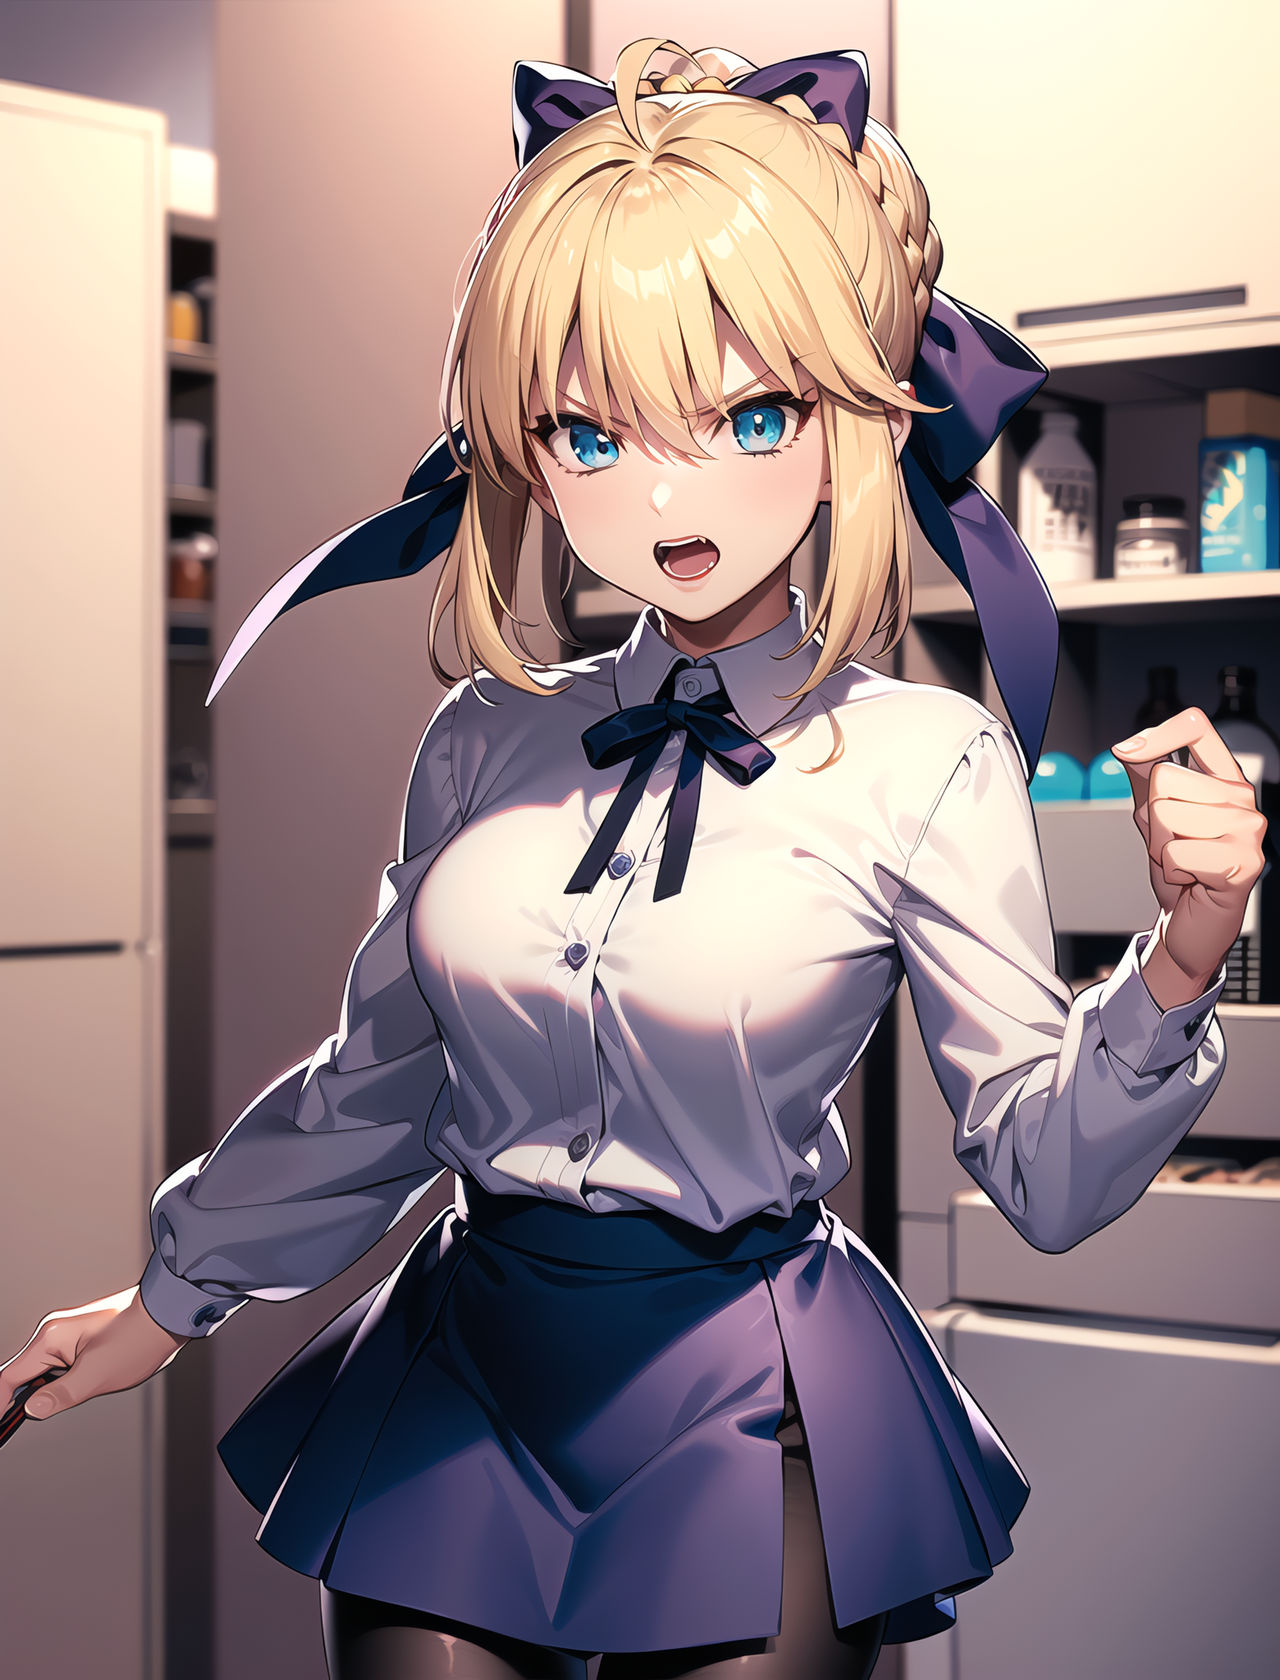 Eat the pudding and get angry with Artoria by Canpon1992X on DeviantArt